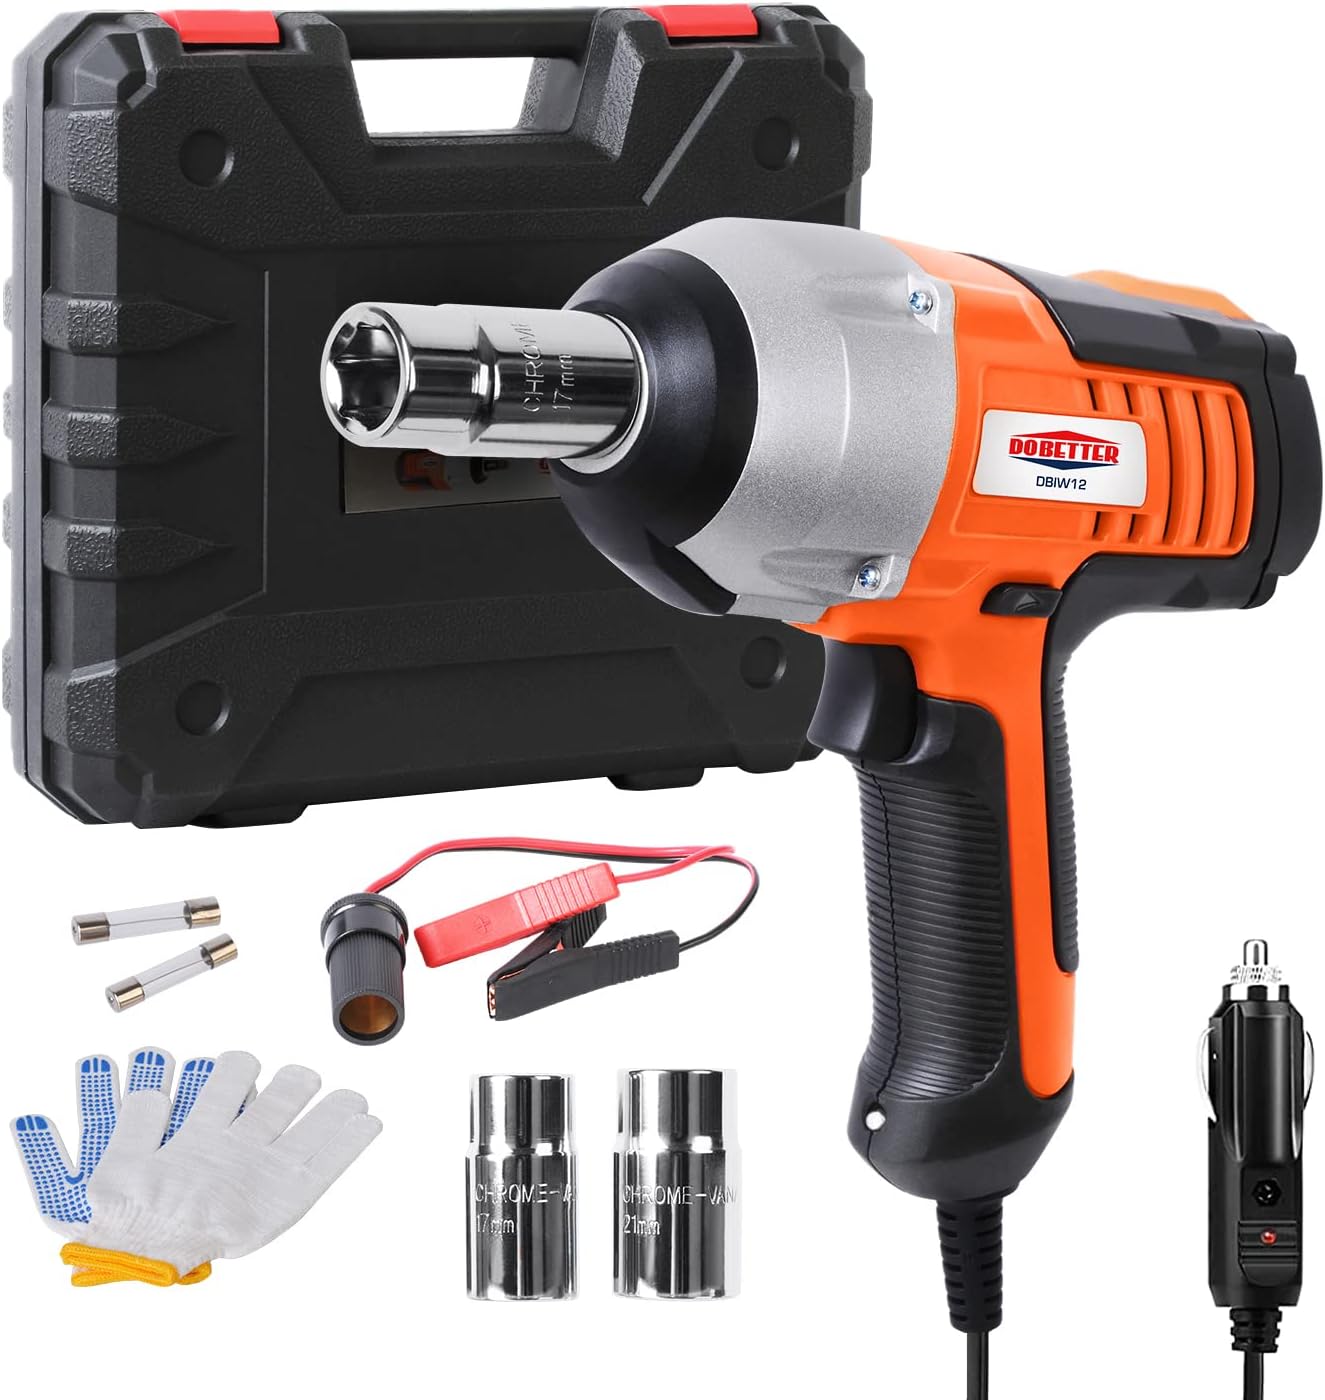 Electric Impact Wrench 12V Impact Wrench, 1/2” Car [...]